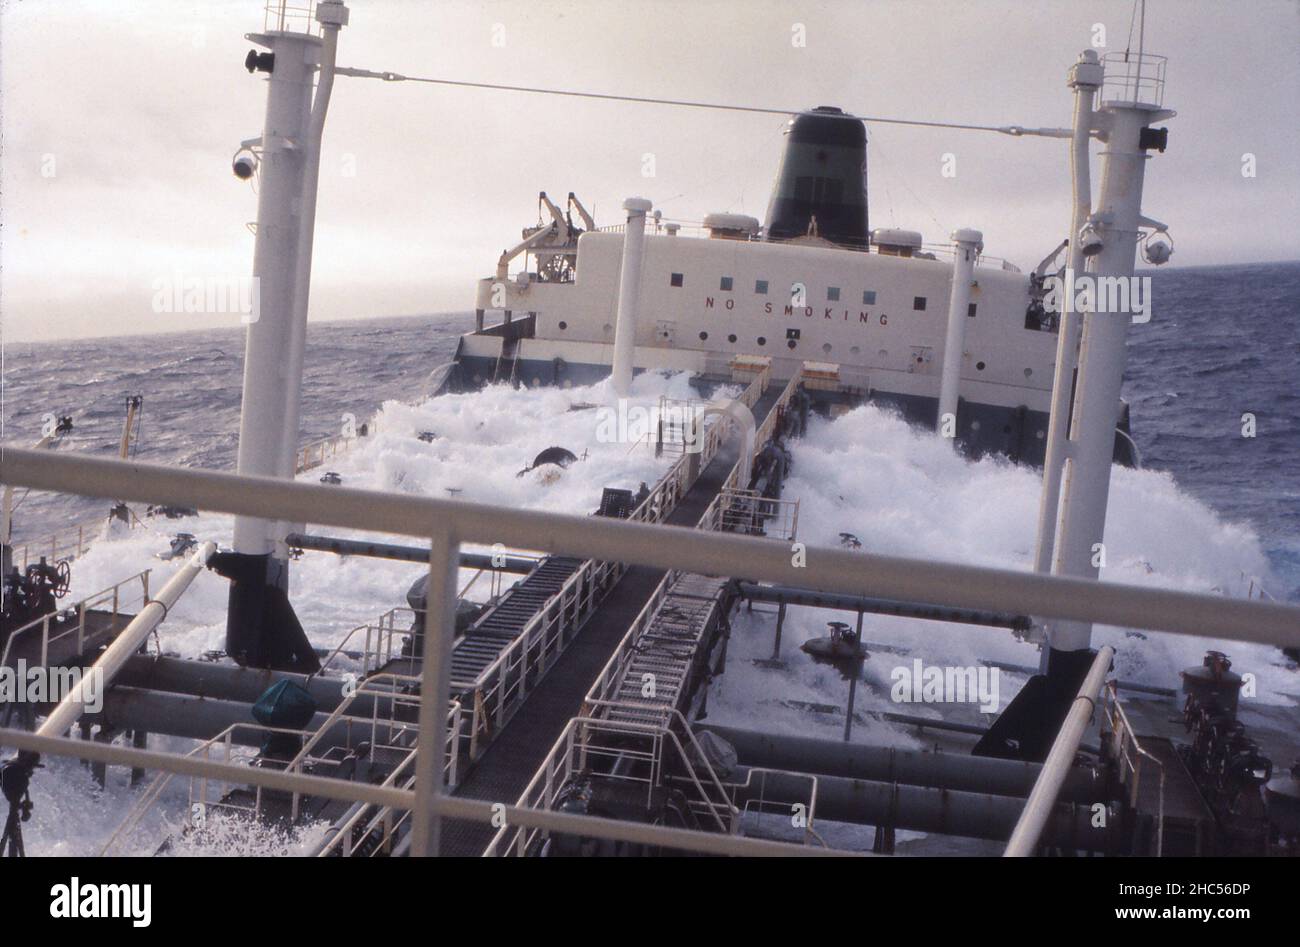 S.S. Texaco Brisbane at sea, looking aft in rough weather. Those of us living in the forward accommodation (Captain, Deck Officers and Radio Officer) had to walk down the catwalk to the other accommodation (shown)  for our meals. The ship was built in 1960 and scrapped in 1977. Photo taken in 1972. Stock Photo